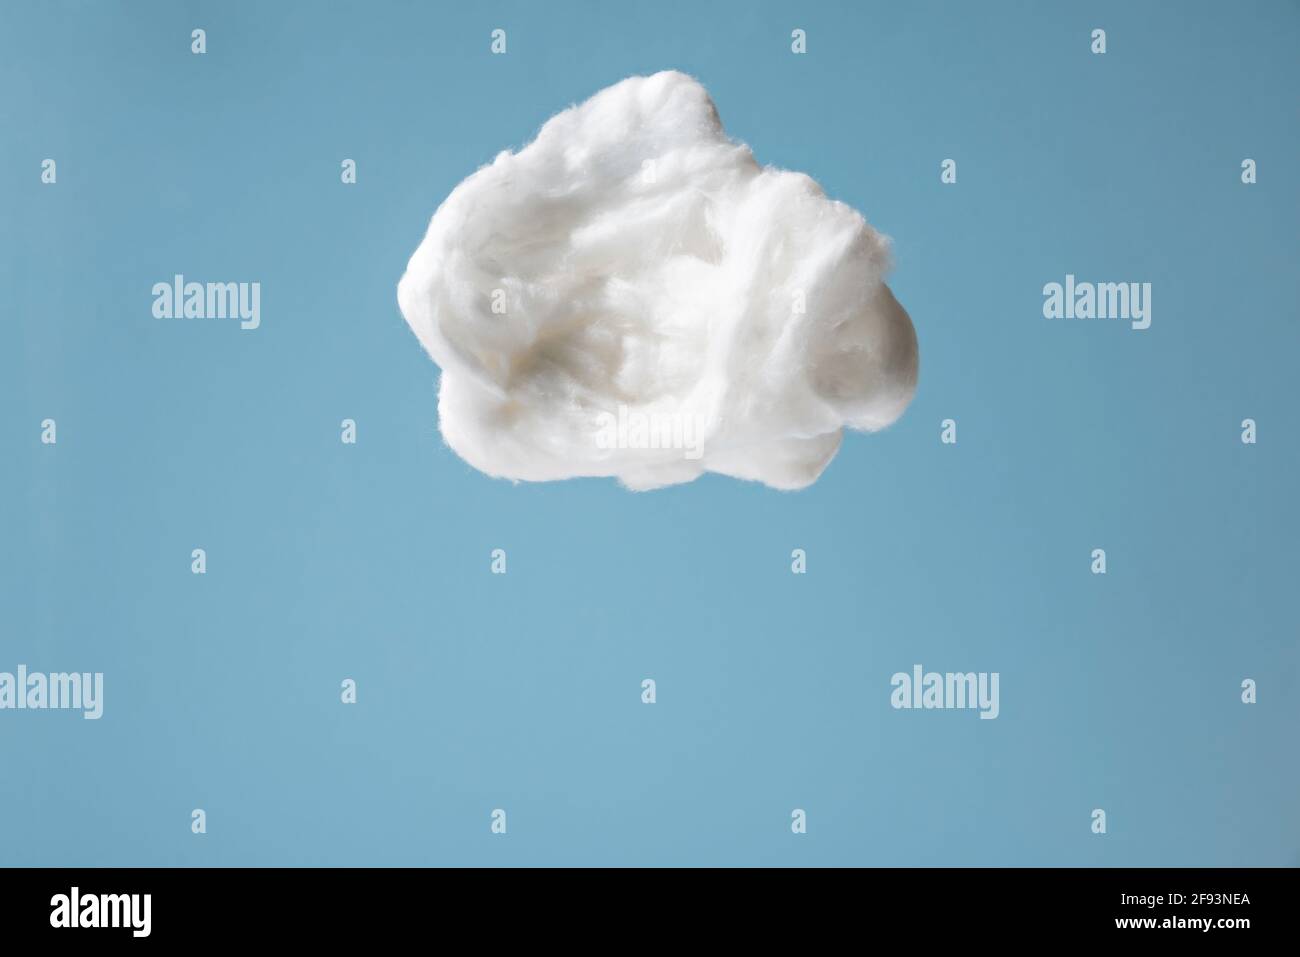 White cotton wool clouds on blue background Stock Photo - Alamy